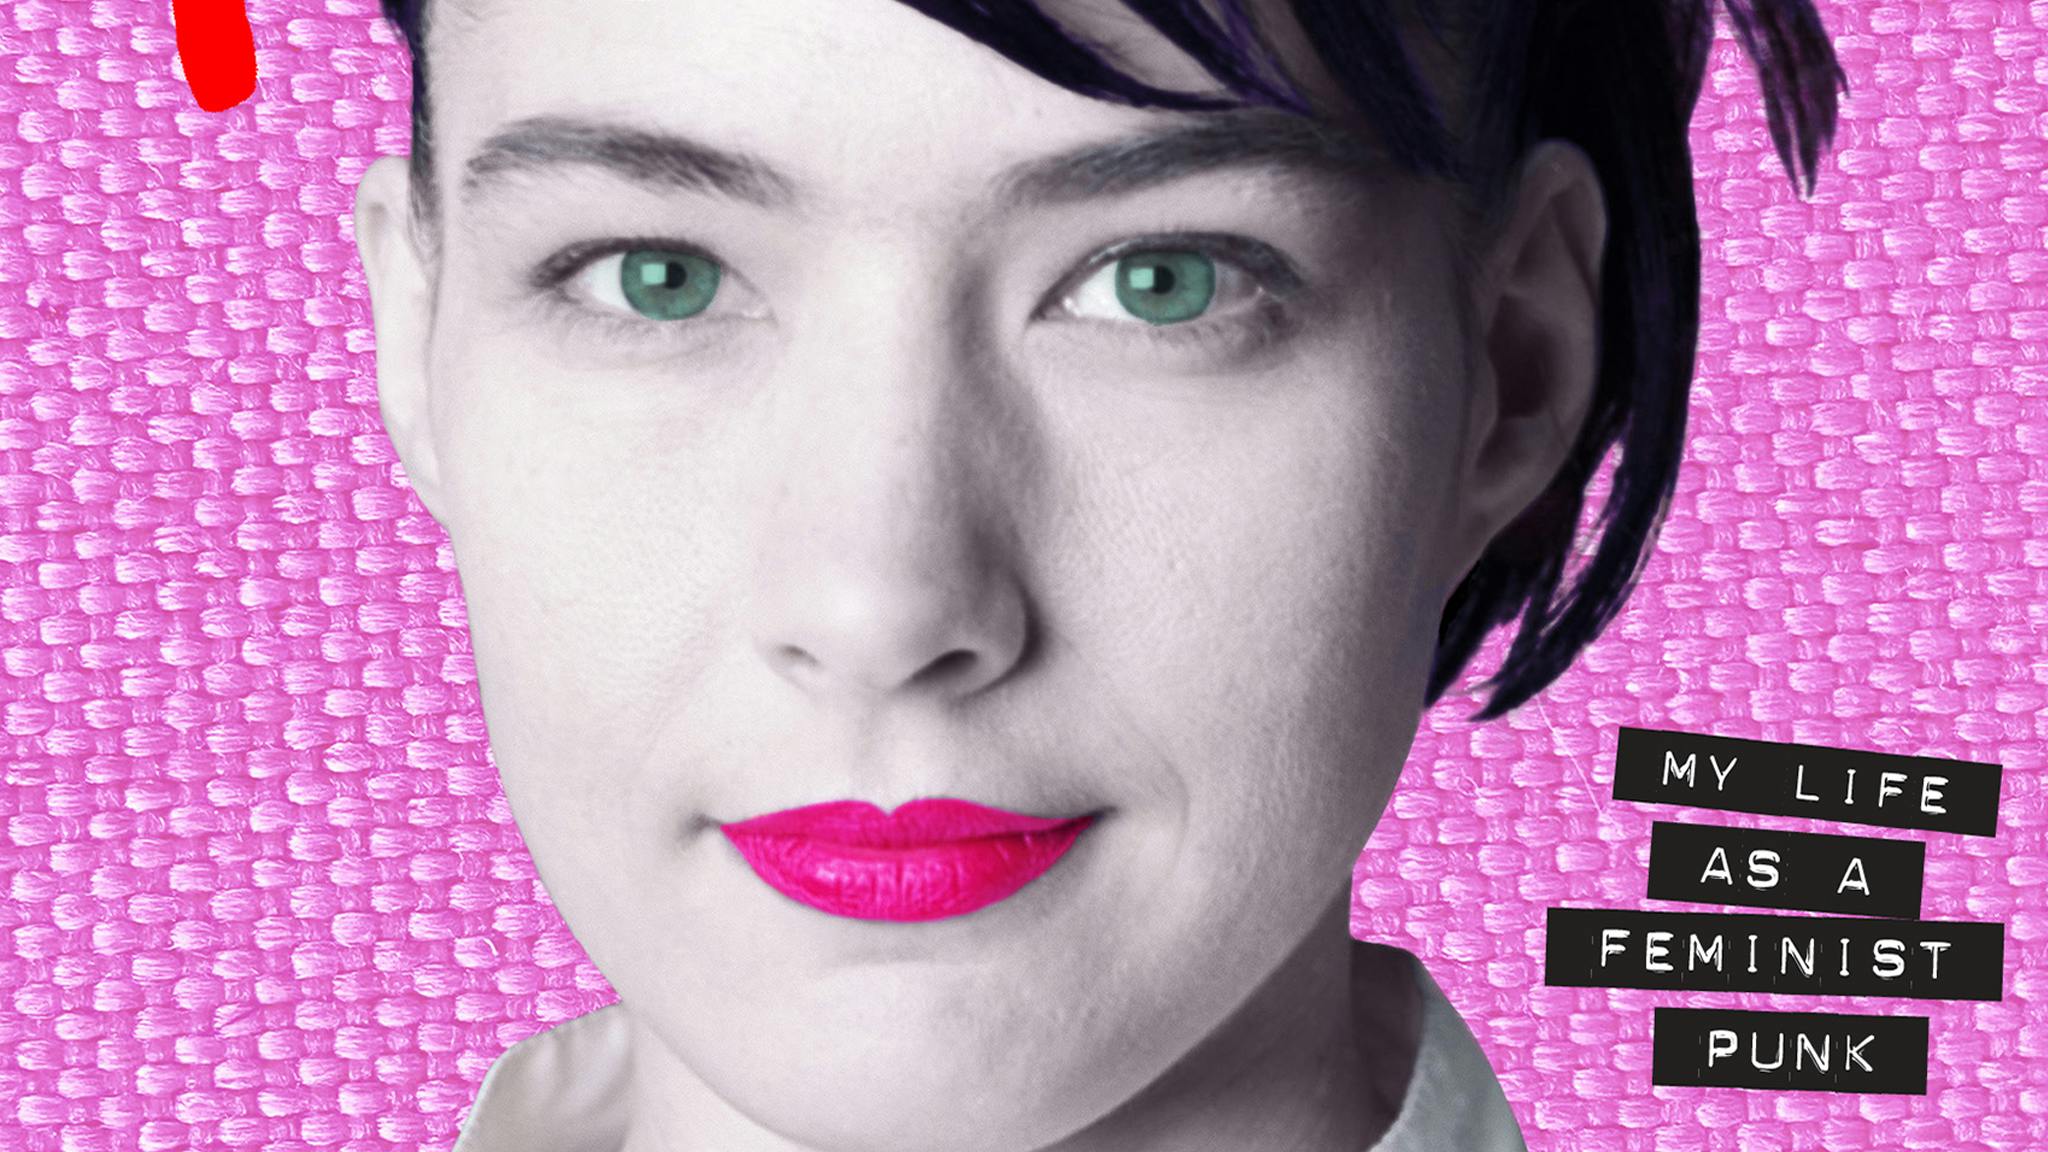 Kathleen Hanna is going on a book tour in support of Rebel Girl: My Life As A Feminist Punk